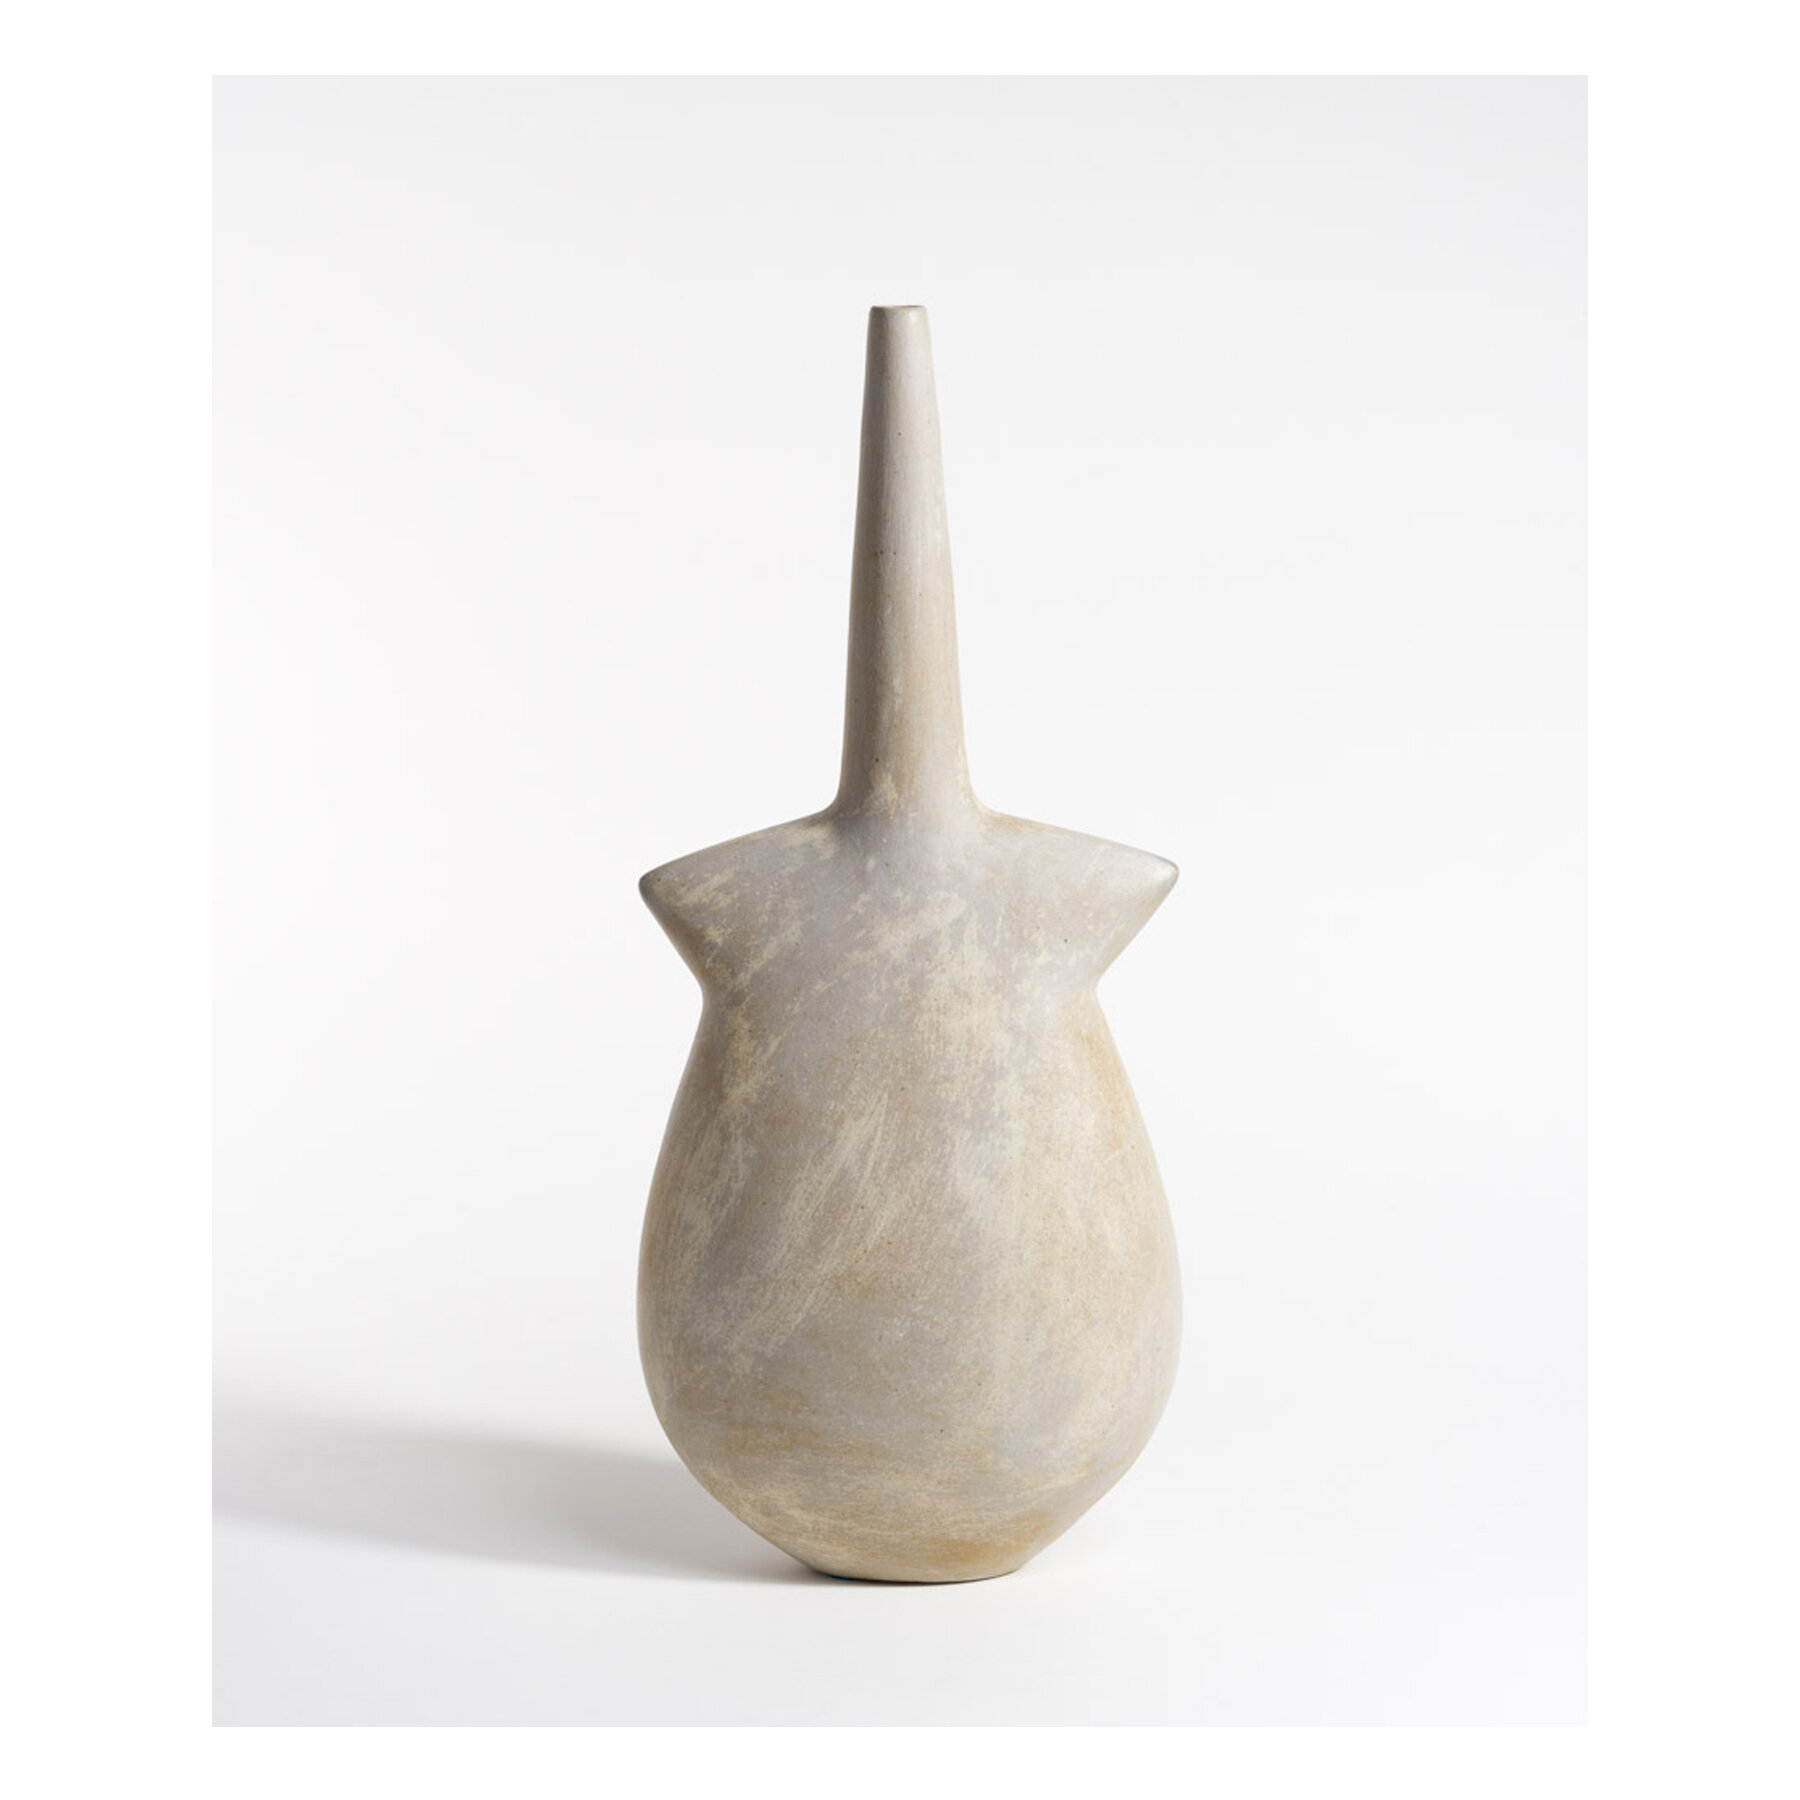 Wayne was influenced by a vast array of historical and contemporary art. Many forms he created echo those found in ancient Cycladic traditions. In this sculptural bottle made in 2015, he references a Beycesultan type idol figure, similar to the work 